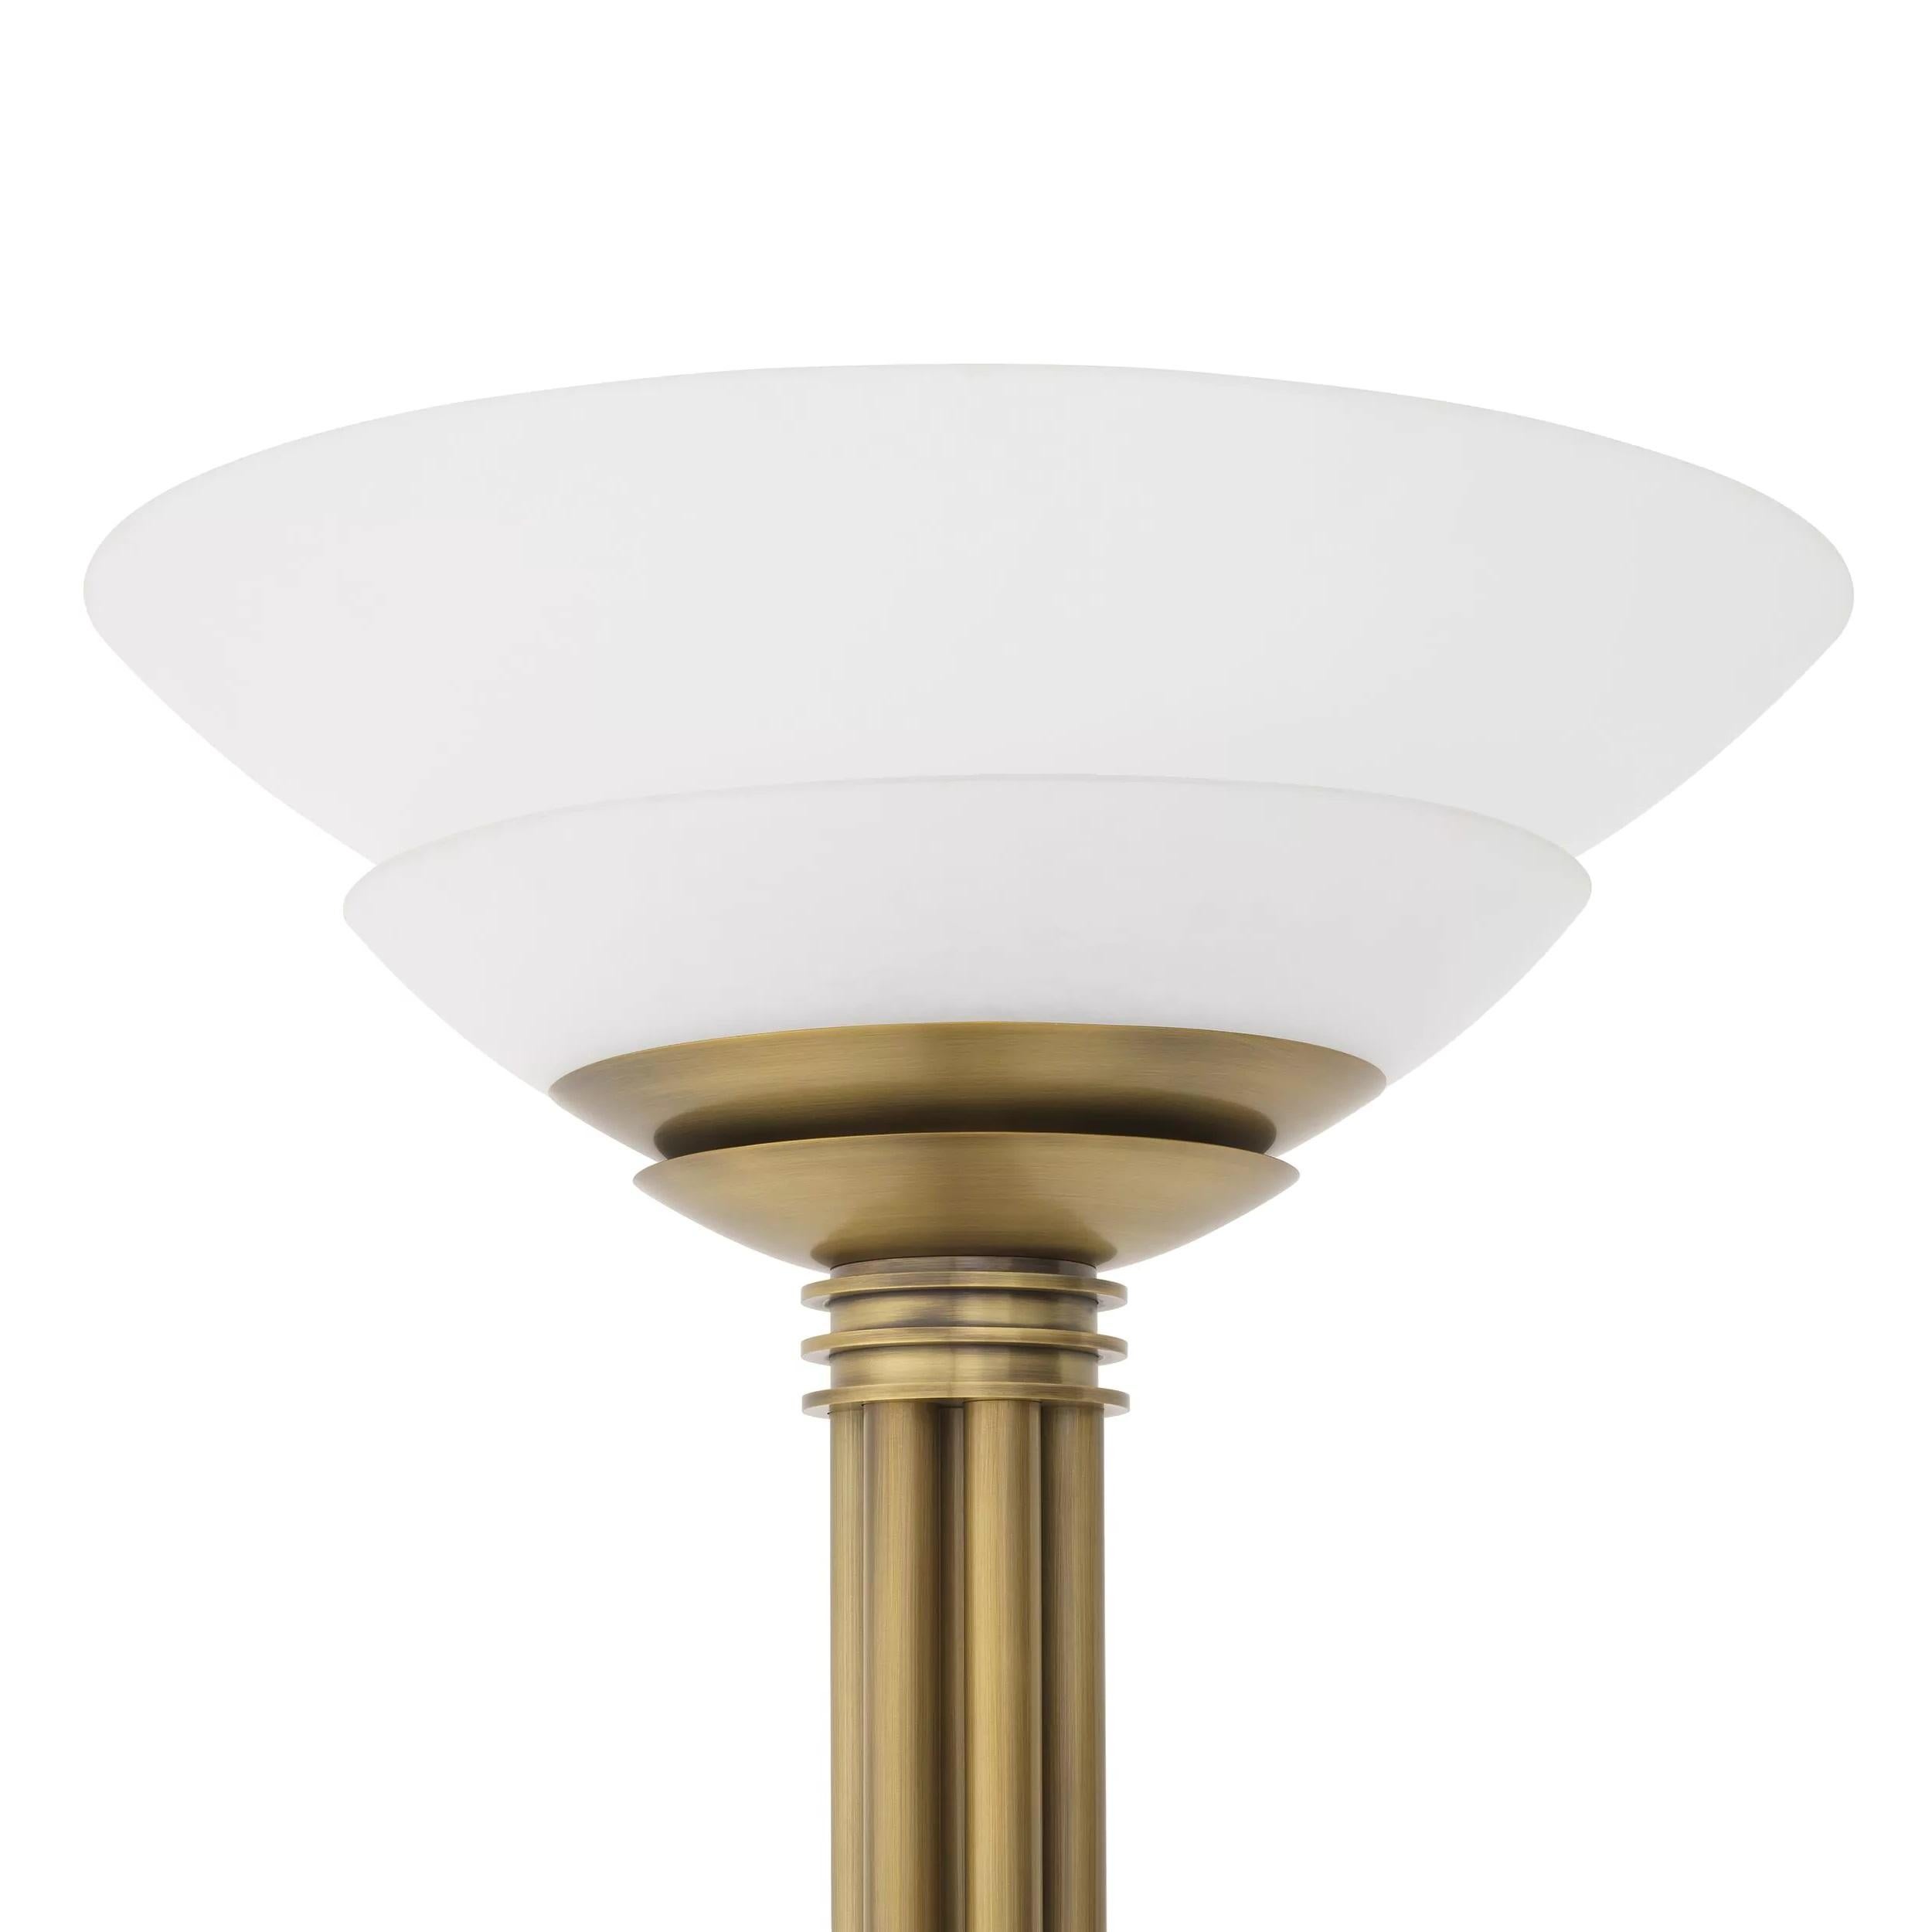 1920s Design and Art Deco style brass and white opaline glass floor lamp composed of a brass finishes metal structure adorned with handmade white opaline glass two tier bowl shaped shades. 1 E27 light bulb required.